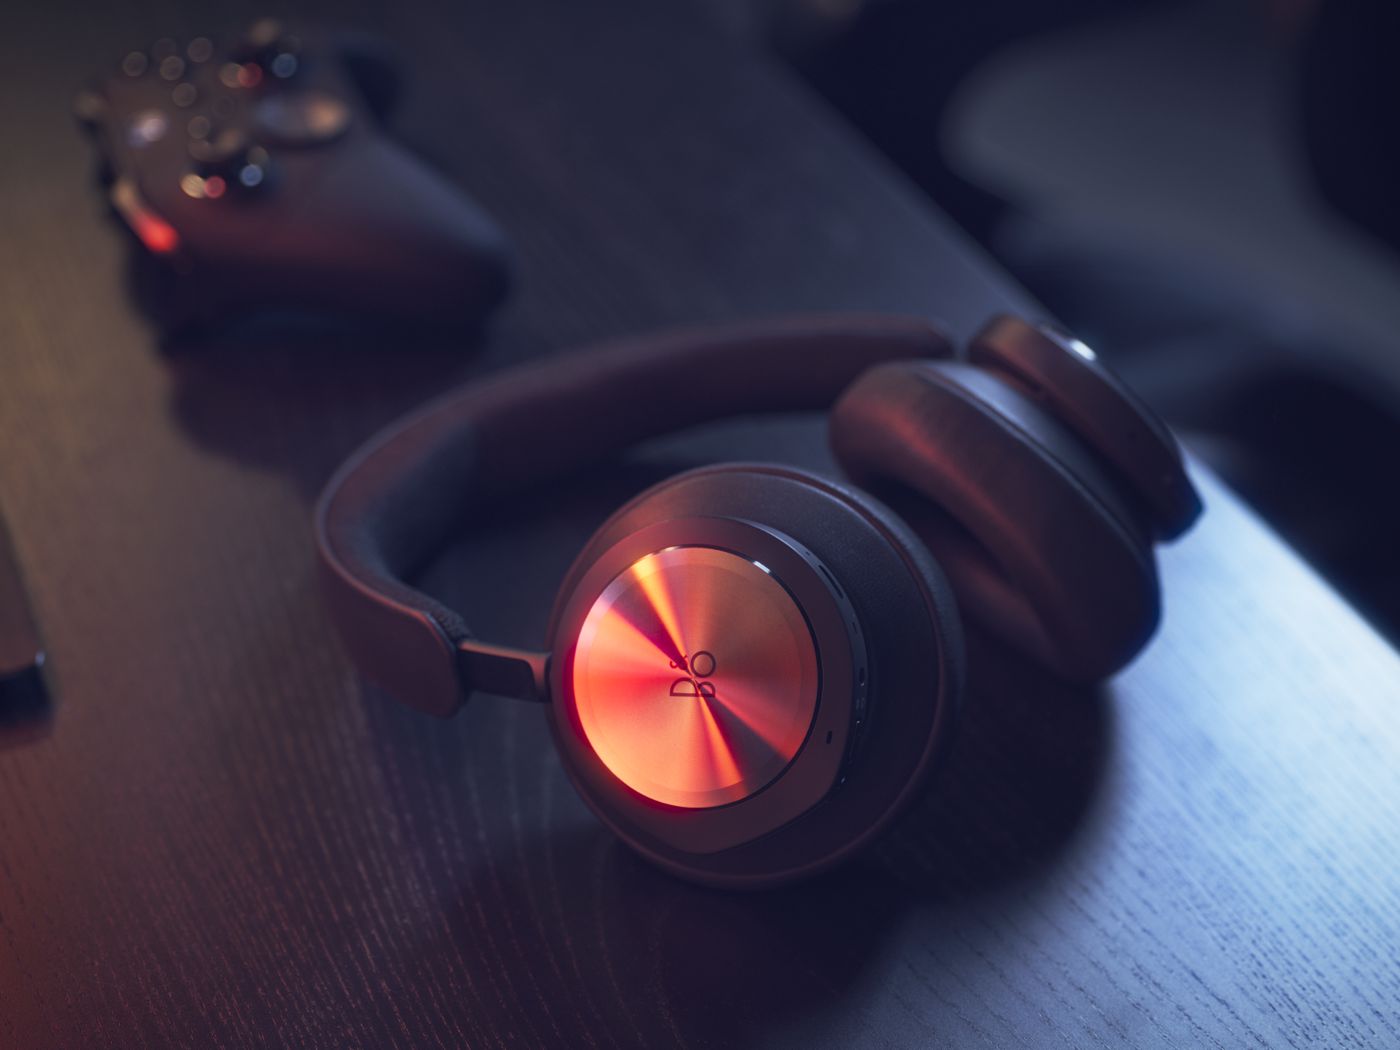 Bang & Olufsen's luxurious gaming headset costs as much as an Xbox Series X